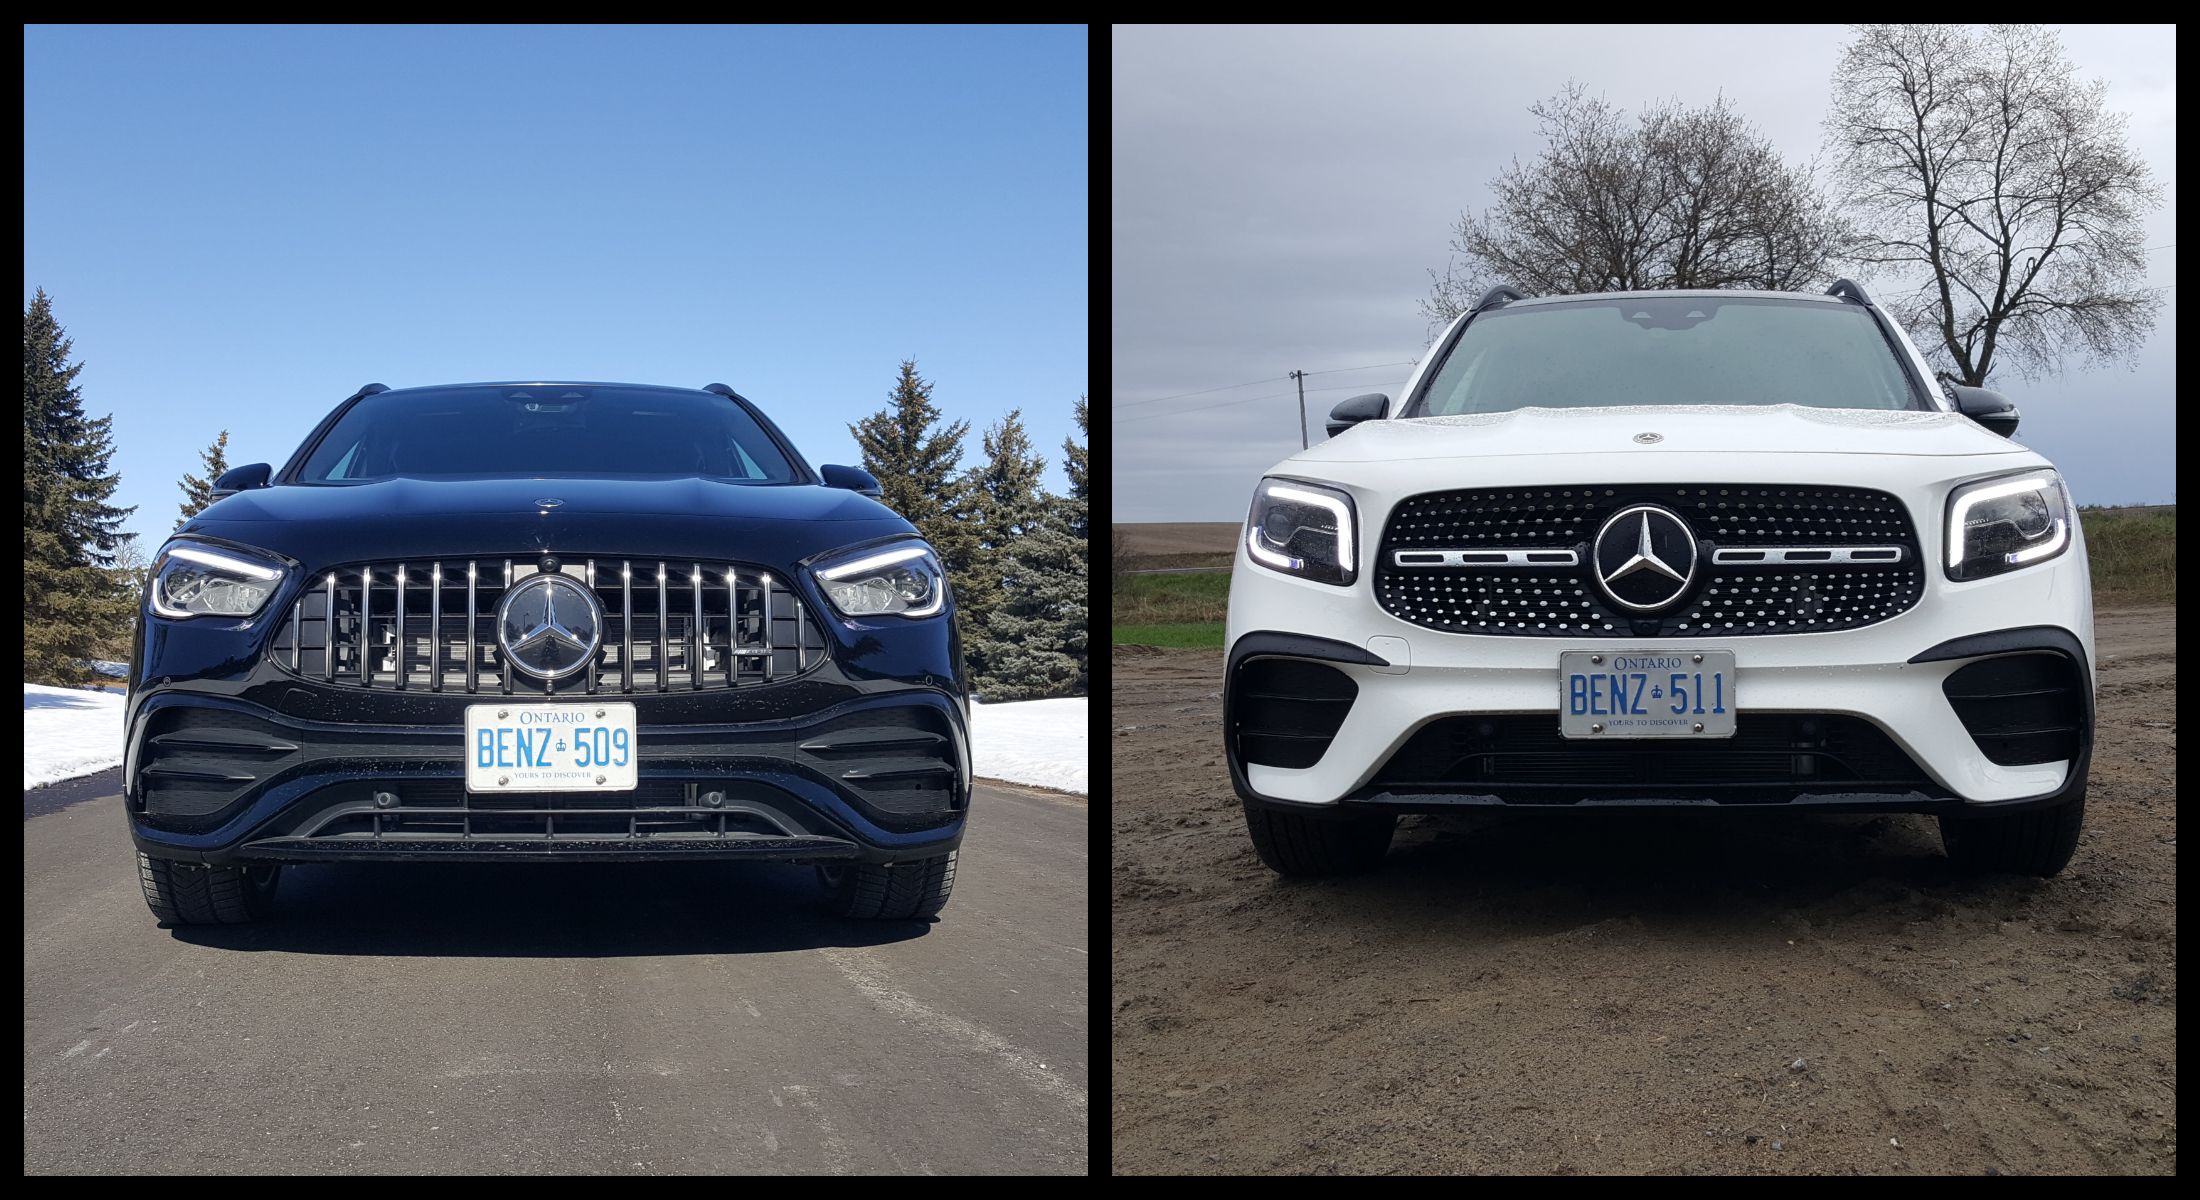 Mercedes-AMG GLA35 and Benz GLB: Which model and trim should you buy?